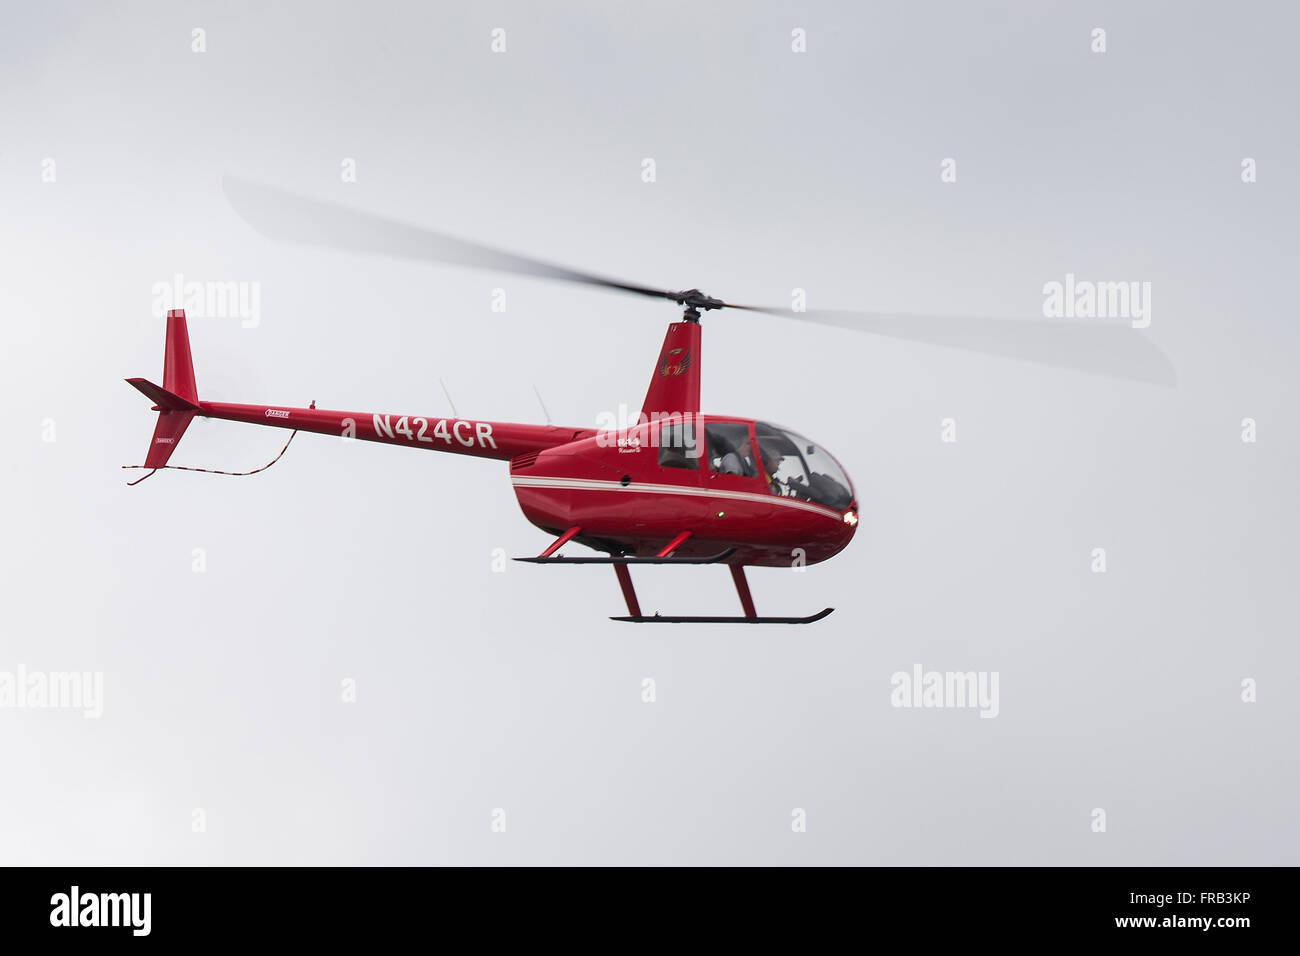 Robinson R44 Raven II (registration N424CR) helicopter flying over Palo Alto Airport (KPAO), Palo Alto, California, United States of America Stock Photo